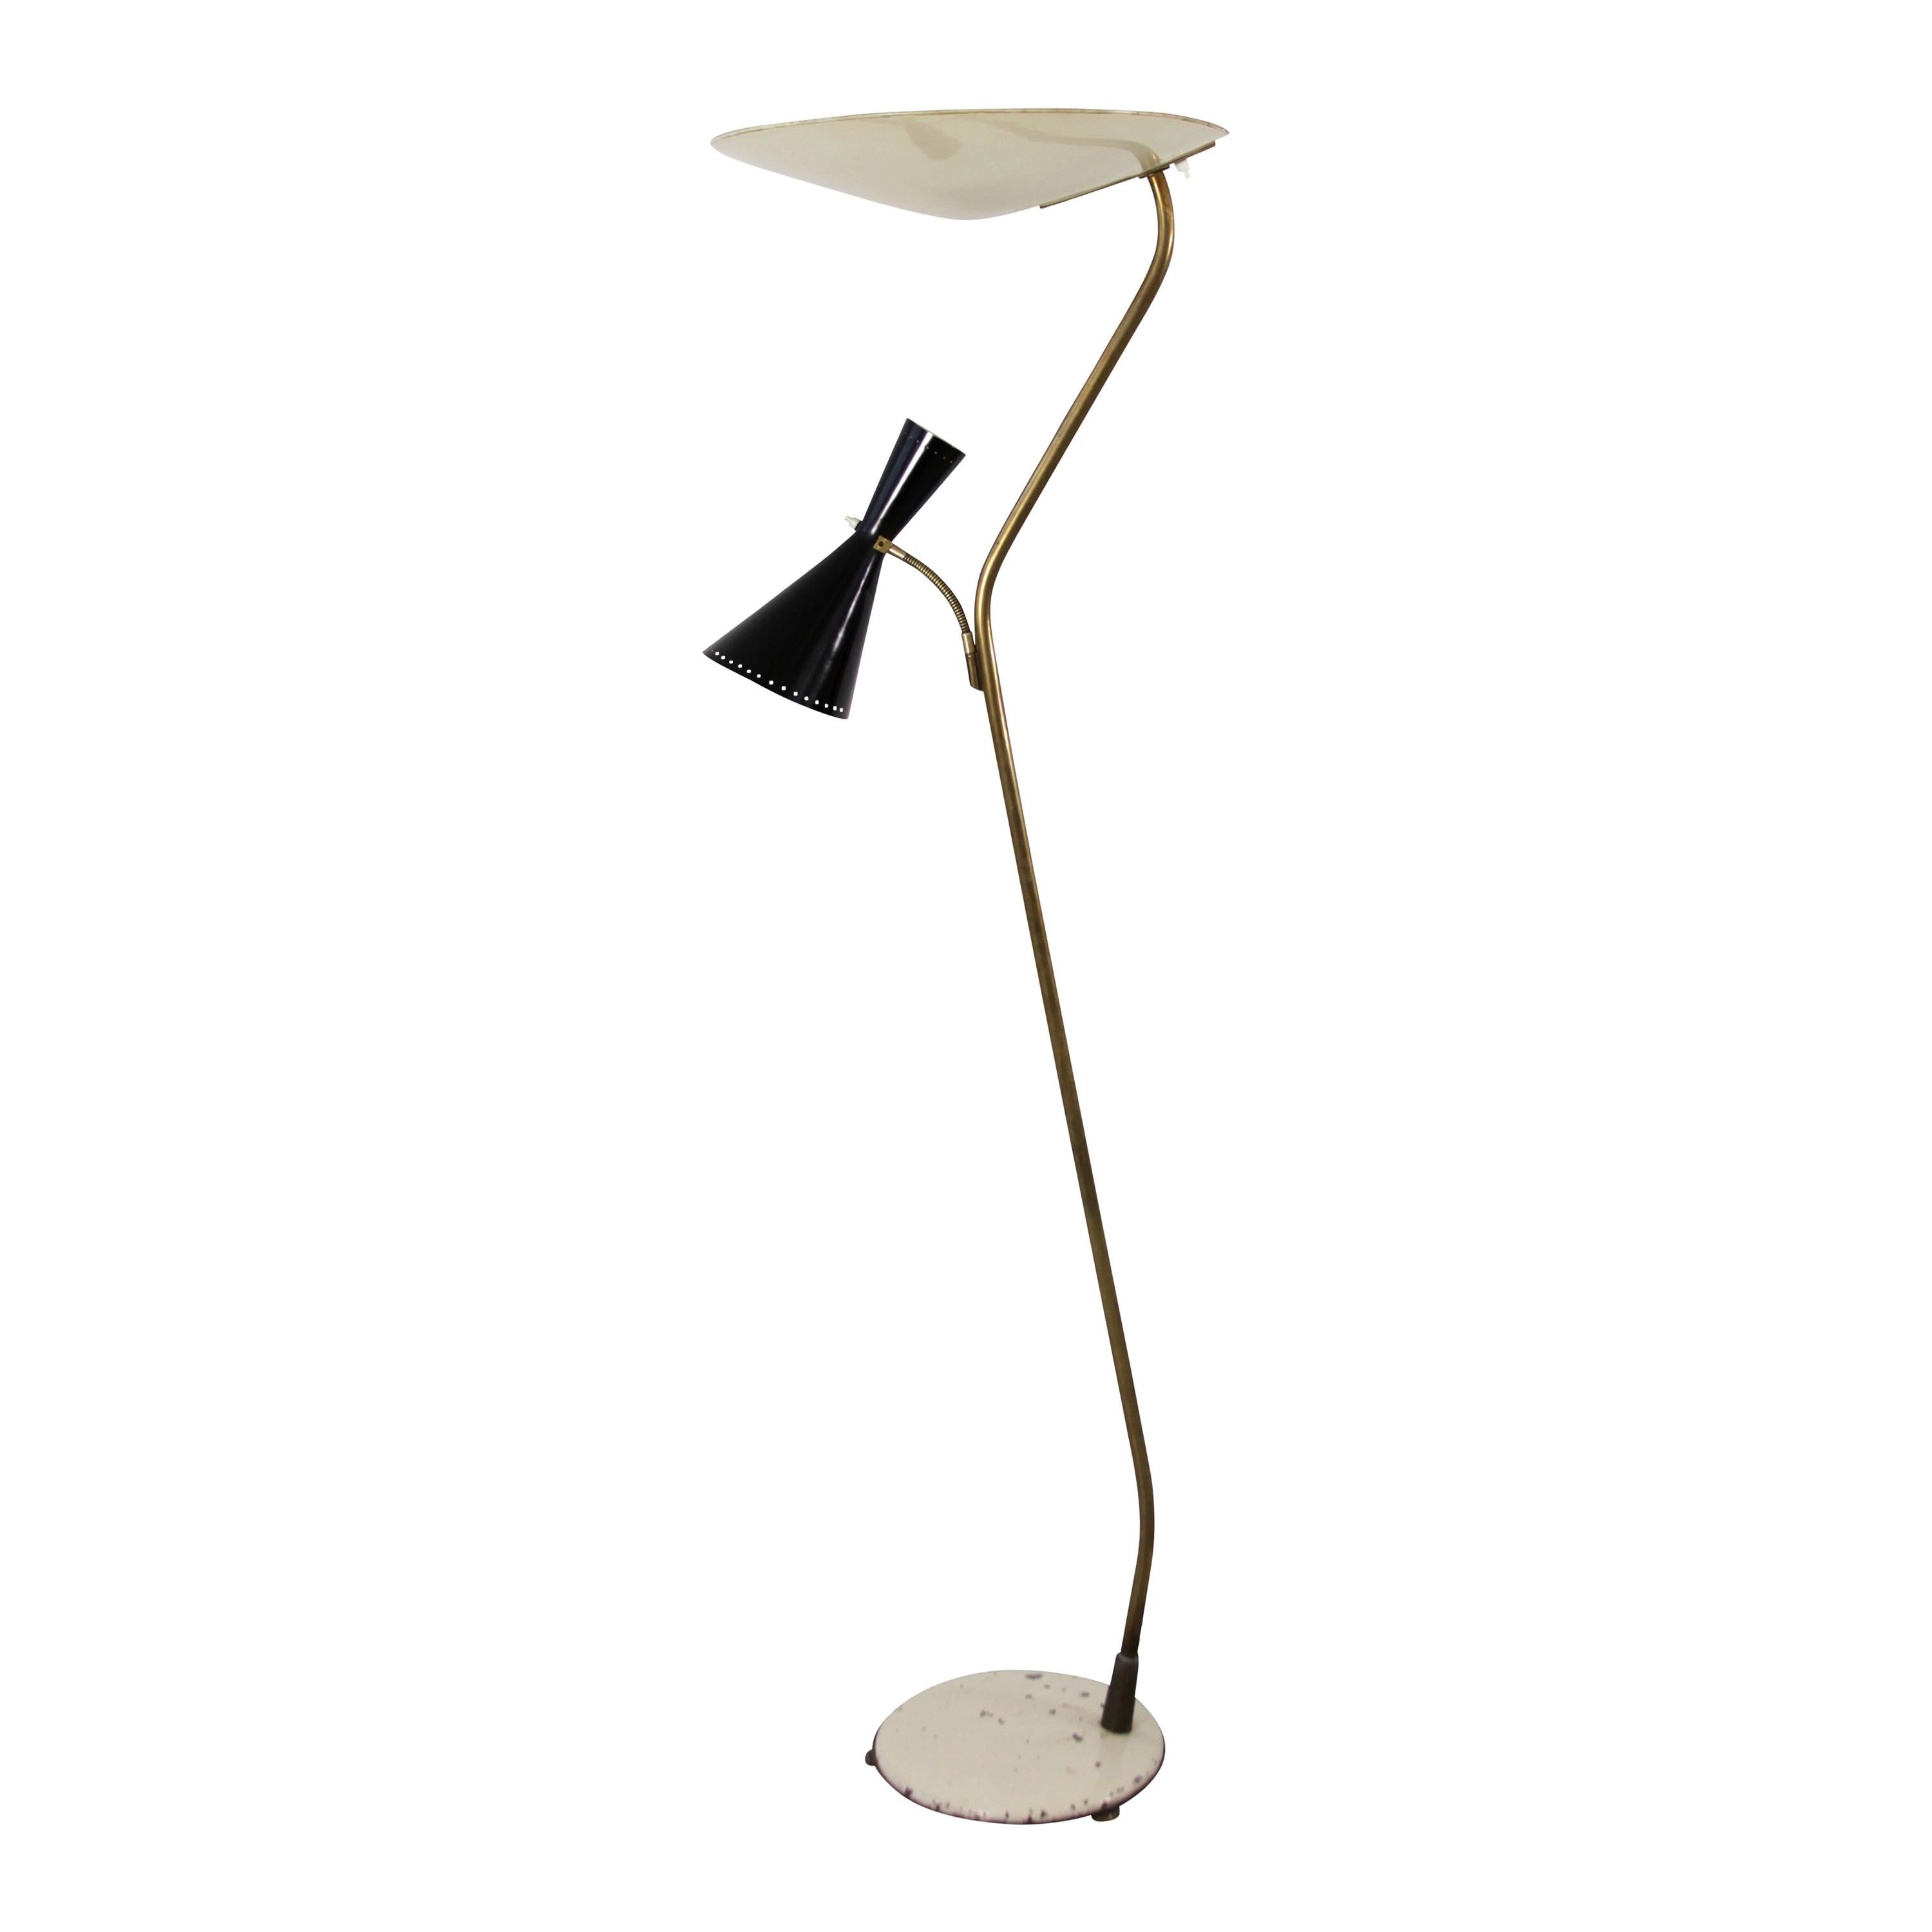 Floor Lamp with Lacquered Metal Shades, by Eberth Zürich, Switzerland, 1950s